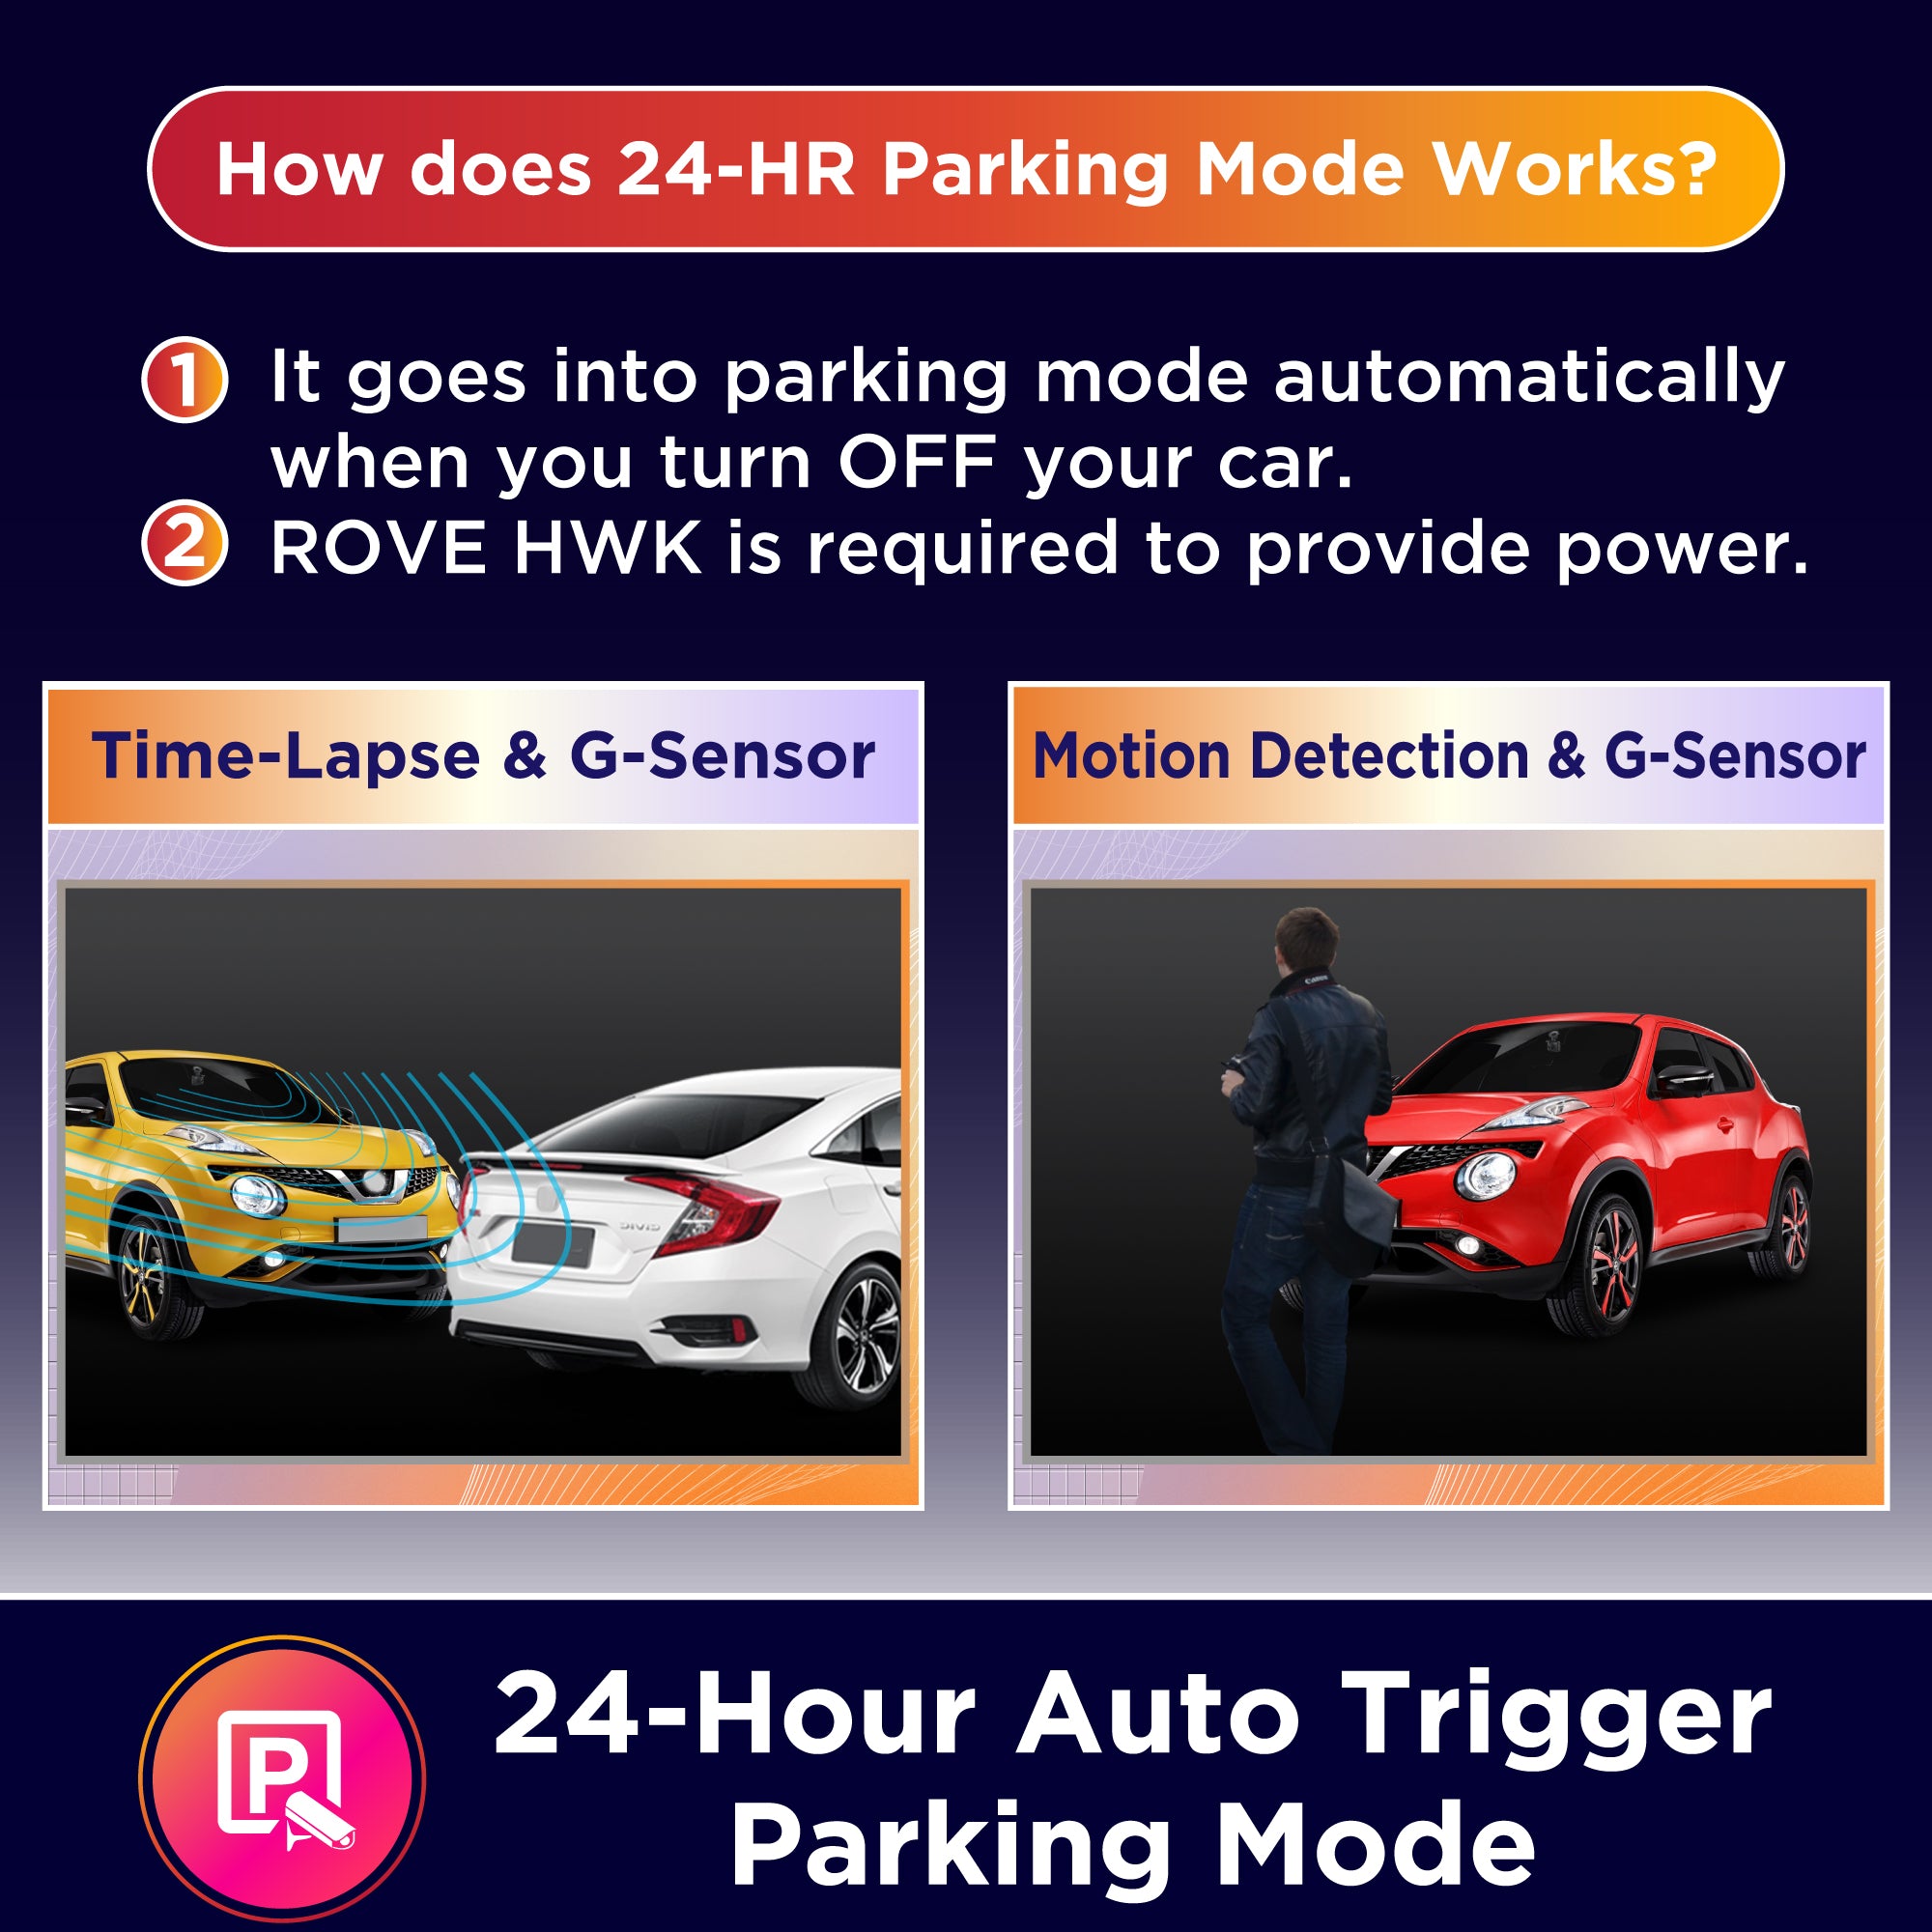 DUAL PARKING MODE FEATURE